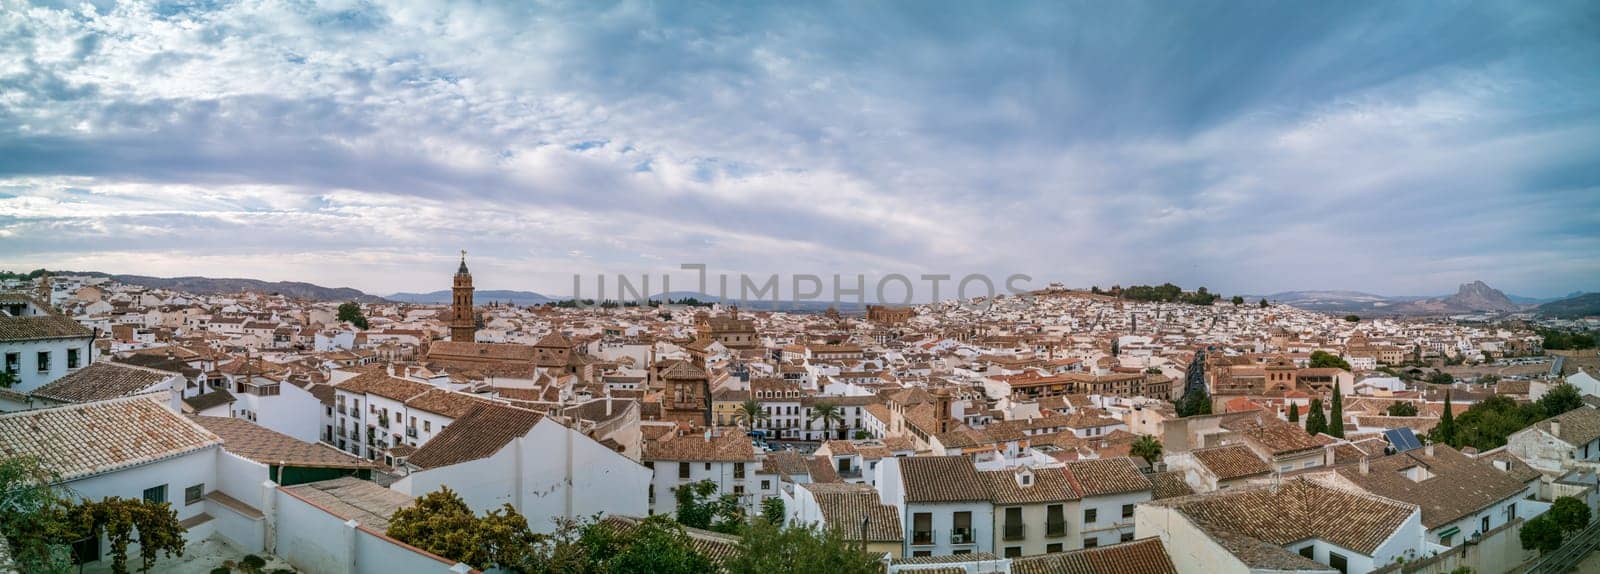 Stunning panoramic photo showcases multiple churches and tile roofs of Antequera, an Andalusian city, under cloudy sunset skies.